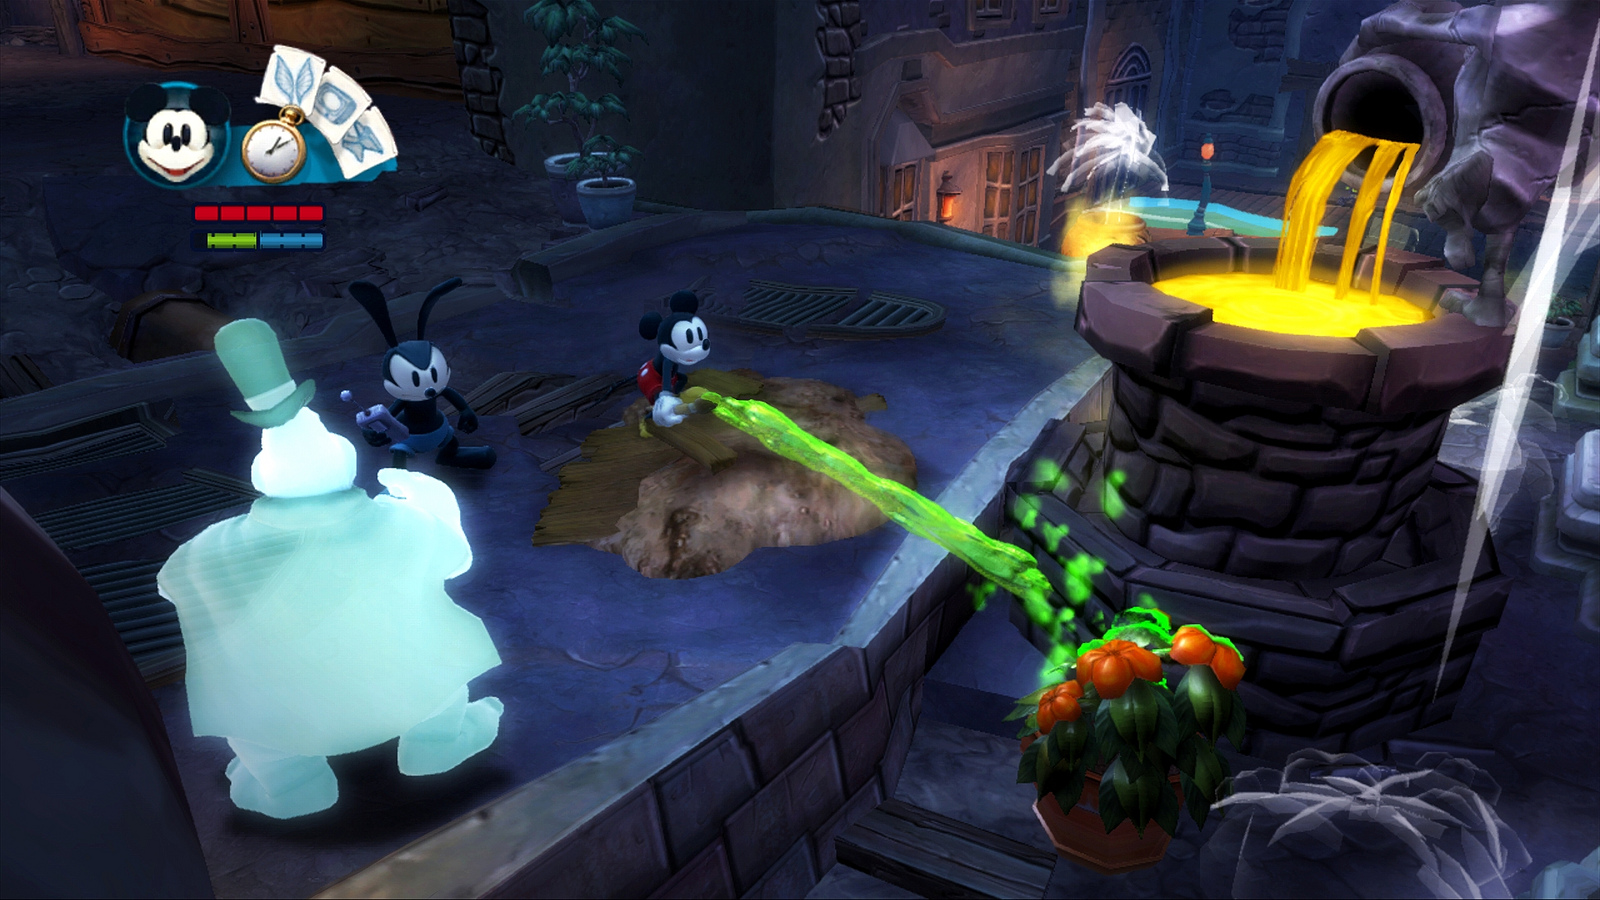 epic mickey 2 the power of two xbox 360